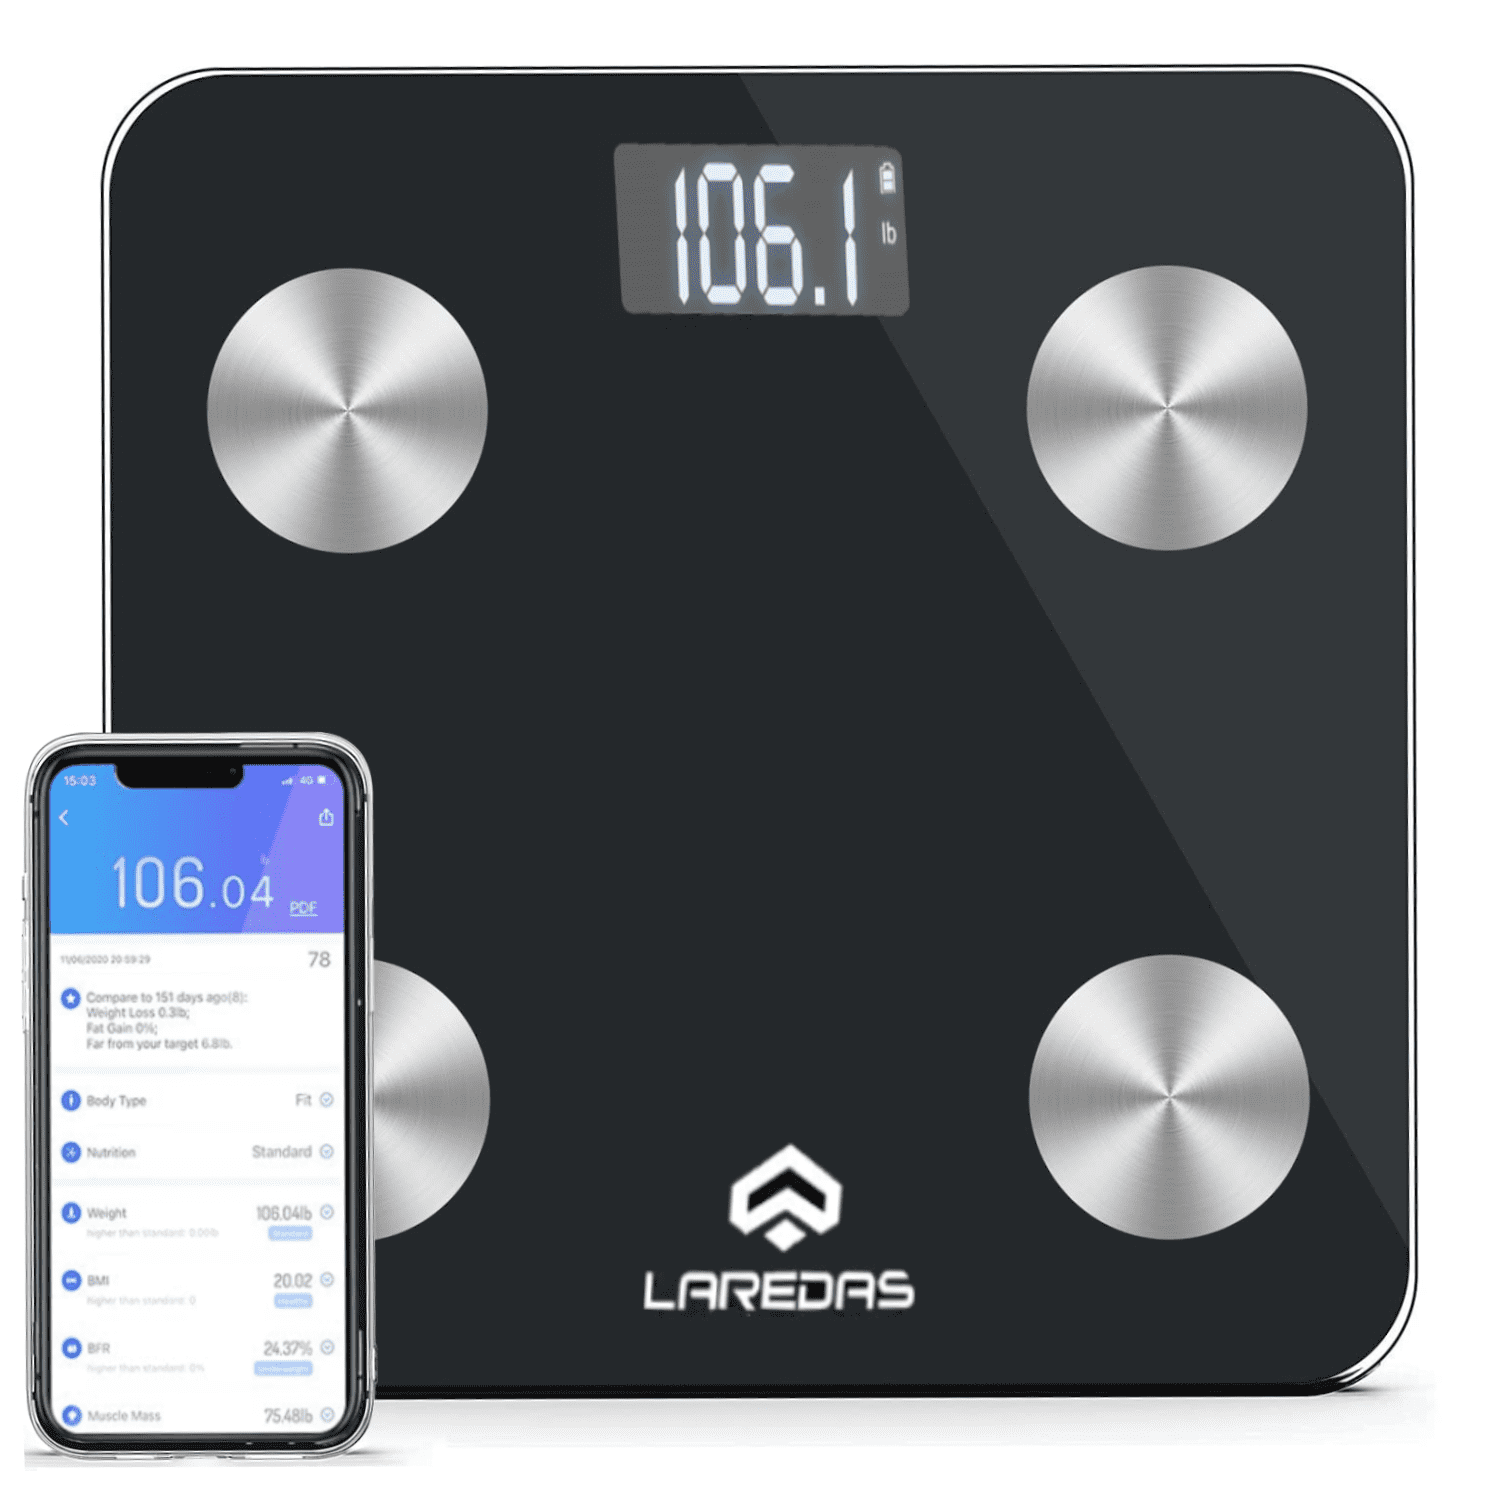 Swtroom Fat Scale for Body Weight, Smart Digital Bathroom Weighing Scales with Body Fat and Water Weight for People, Bluetooth BMI Electronic Body